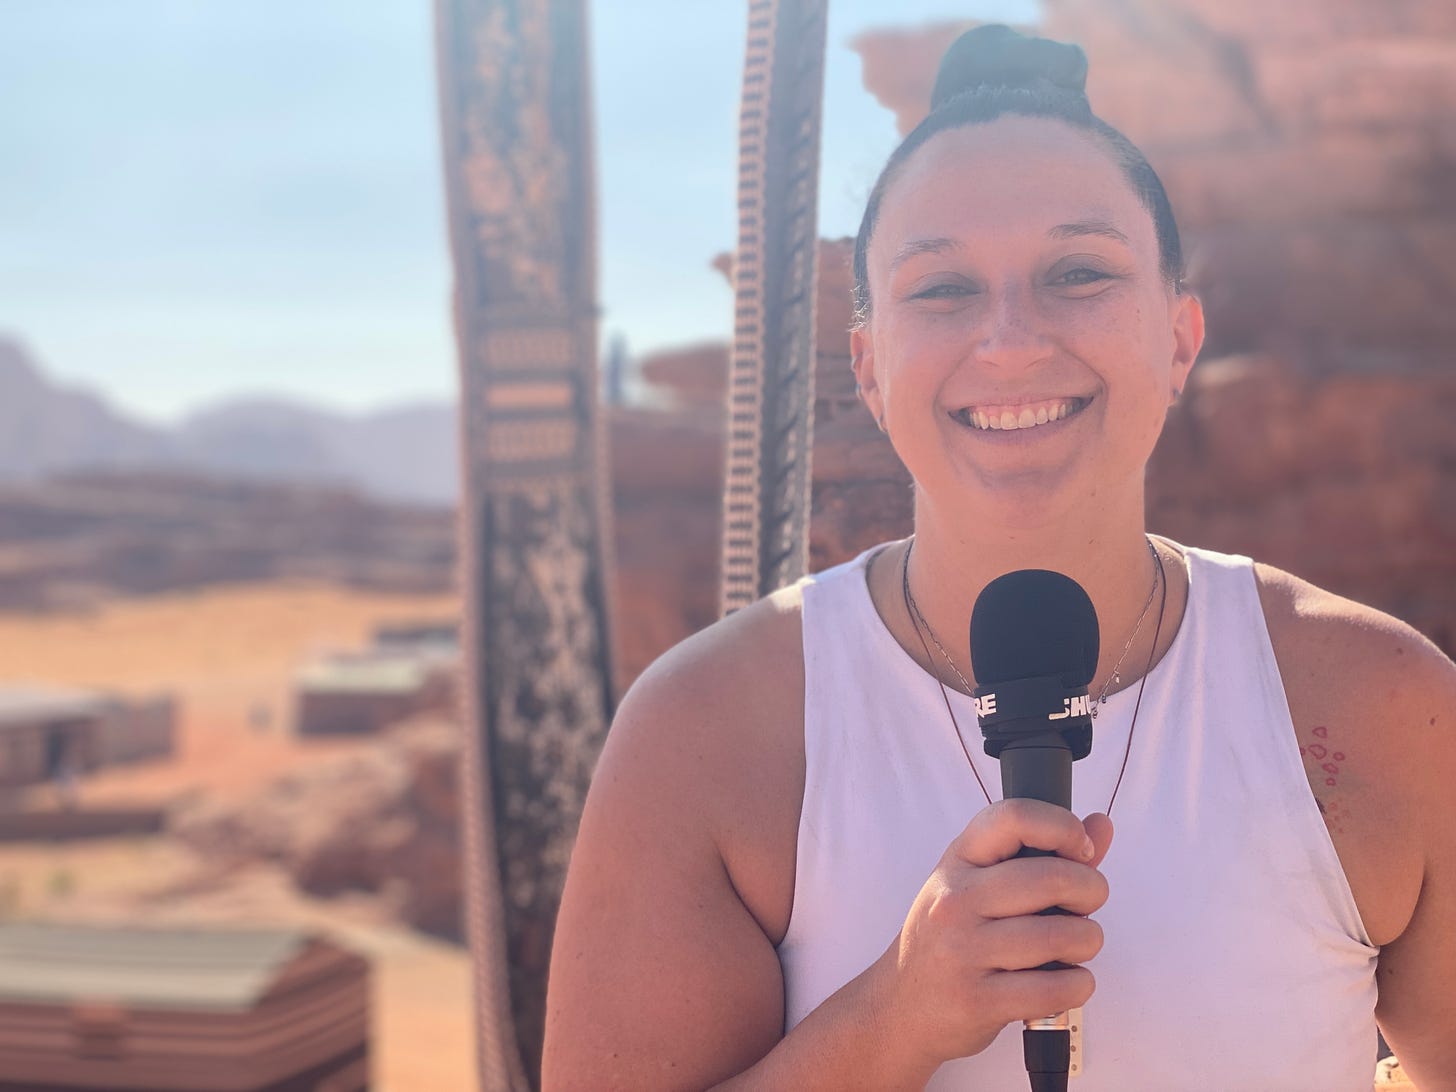 Helen holding a microphone with the desert behind her